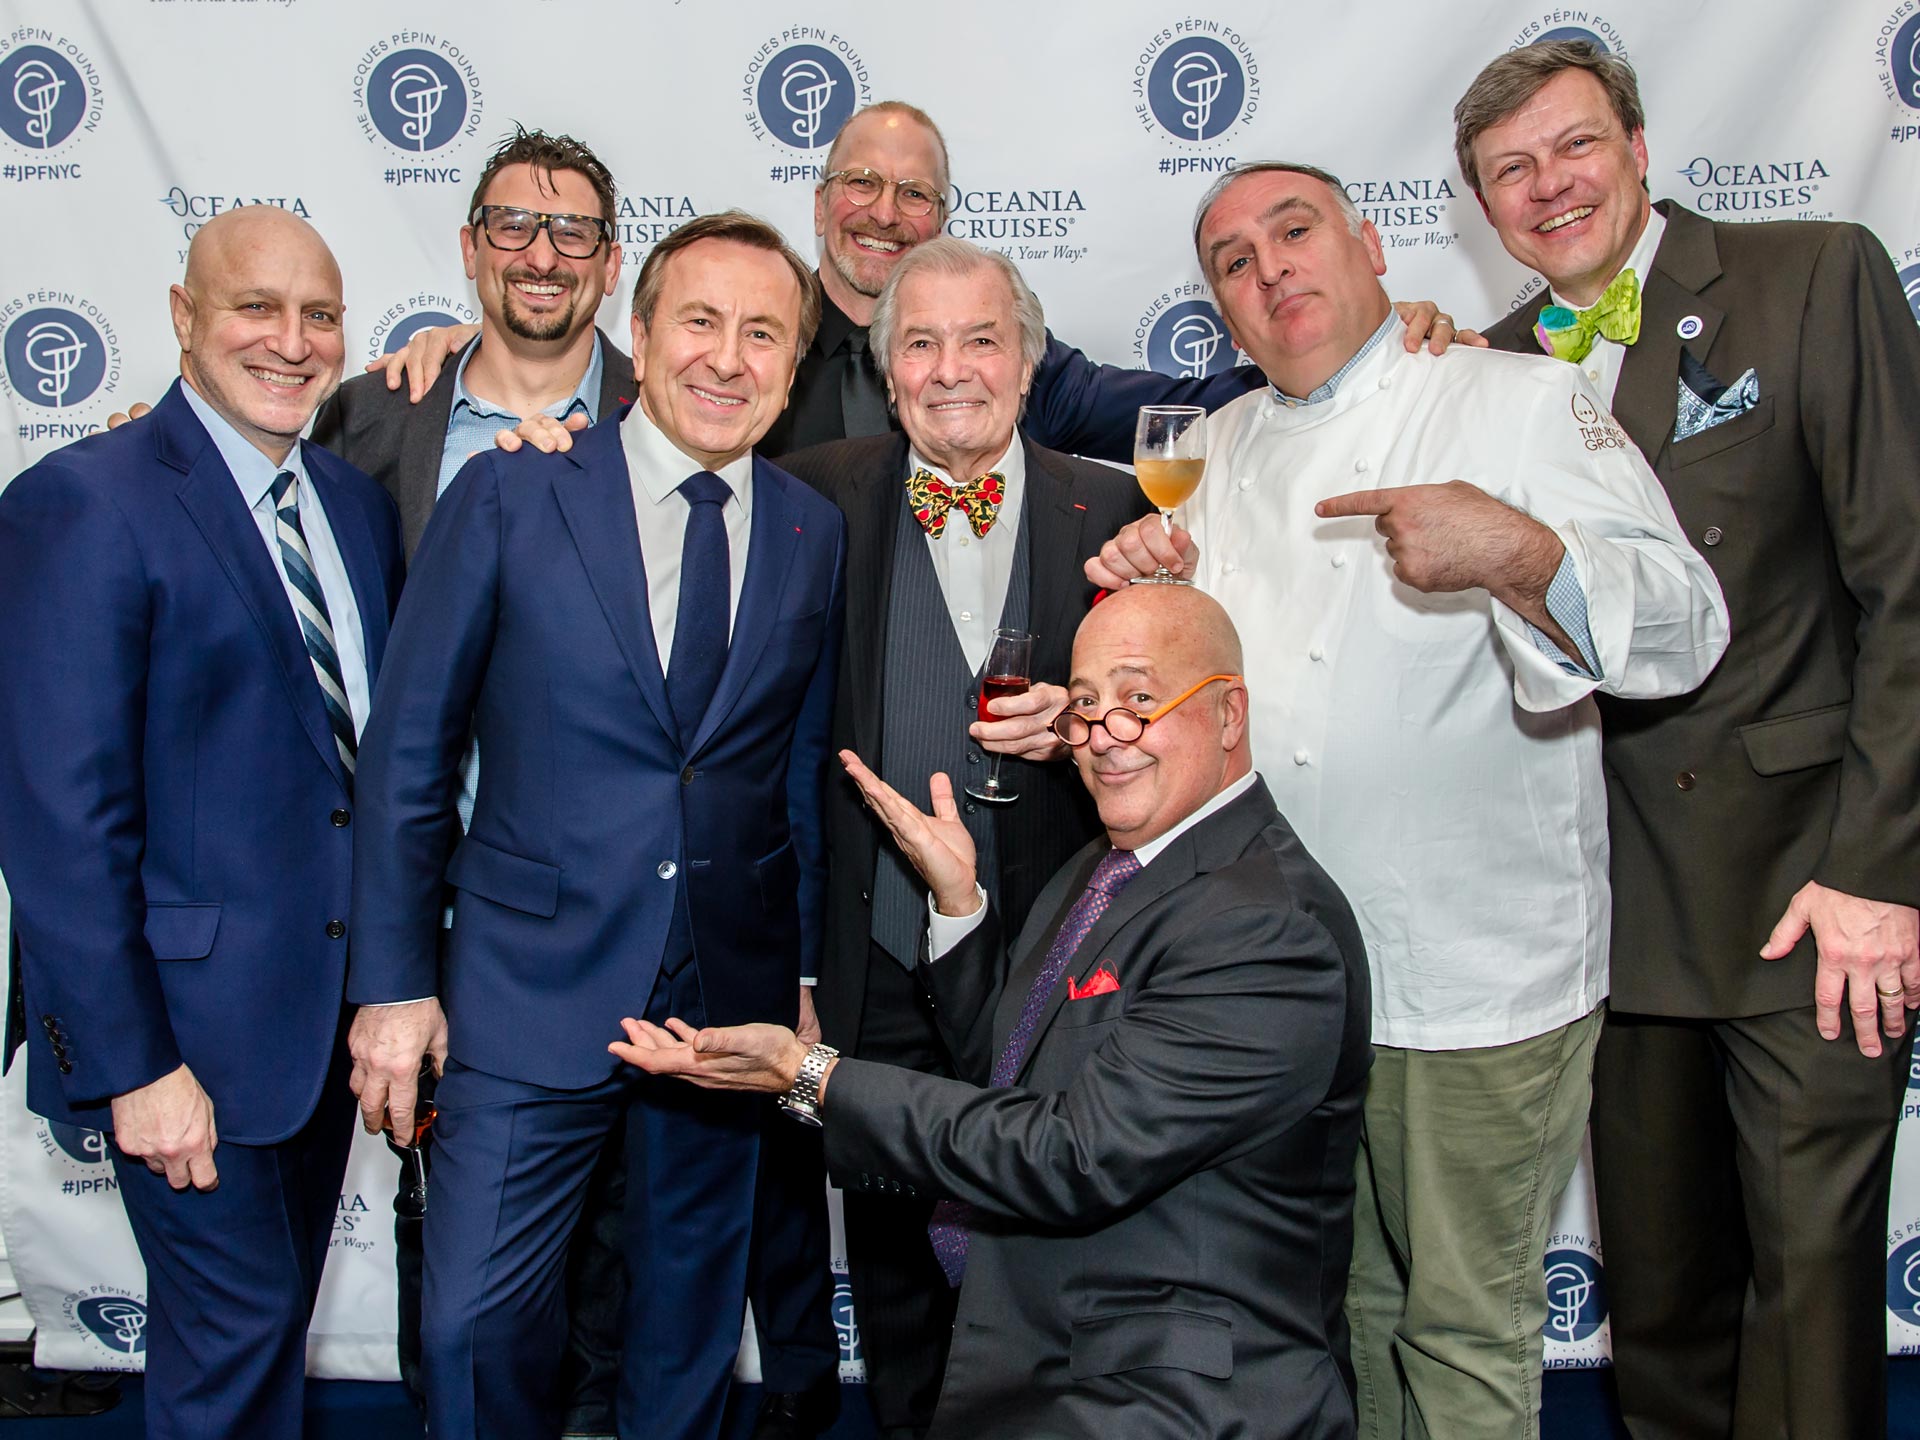 Tom Colicchio, Daniel Boulud, Jacques Pepin, Andrew Zimmern, Jose Andres